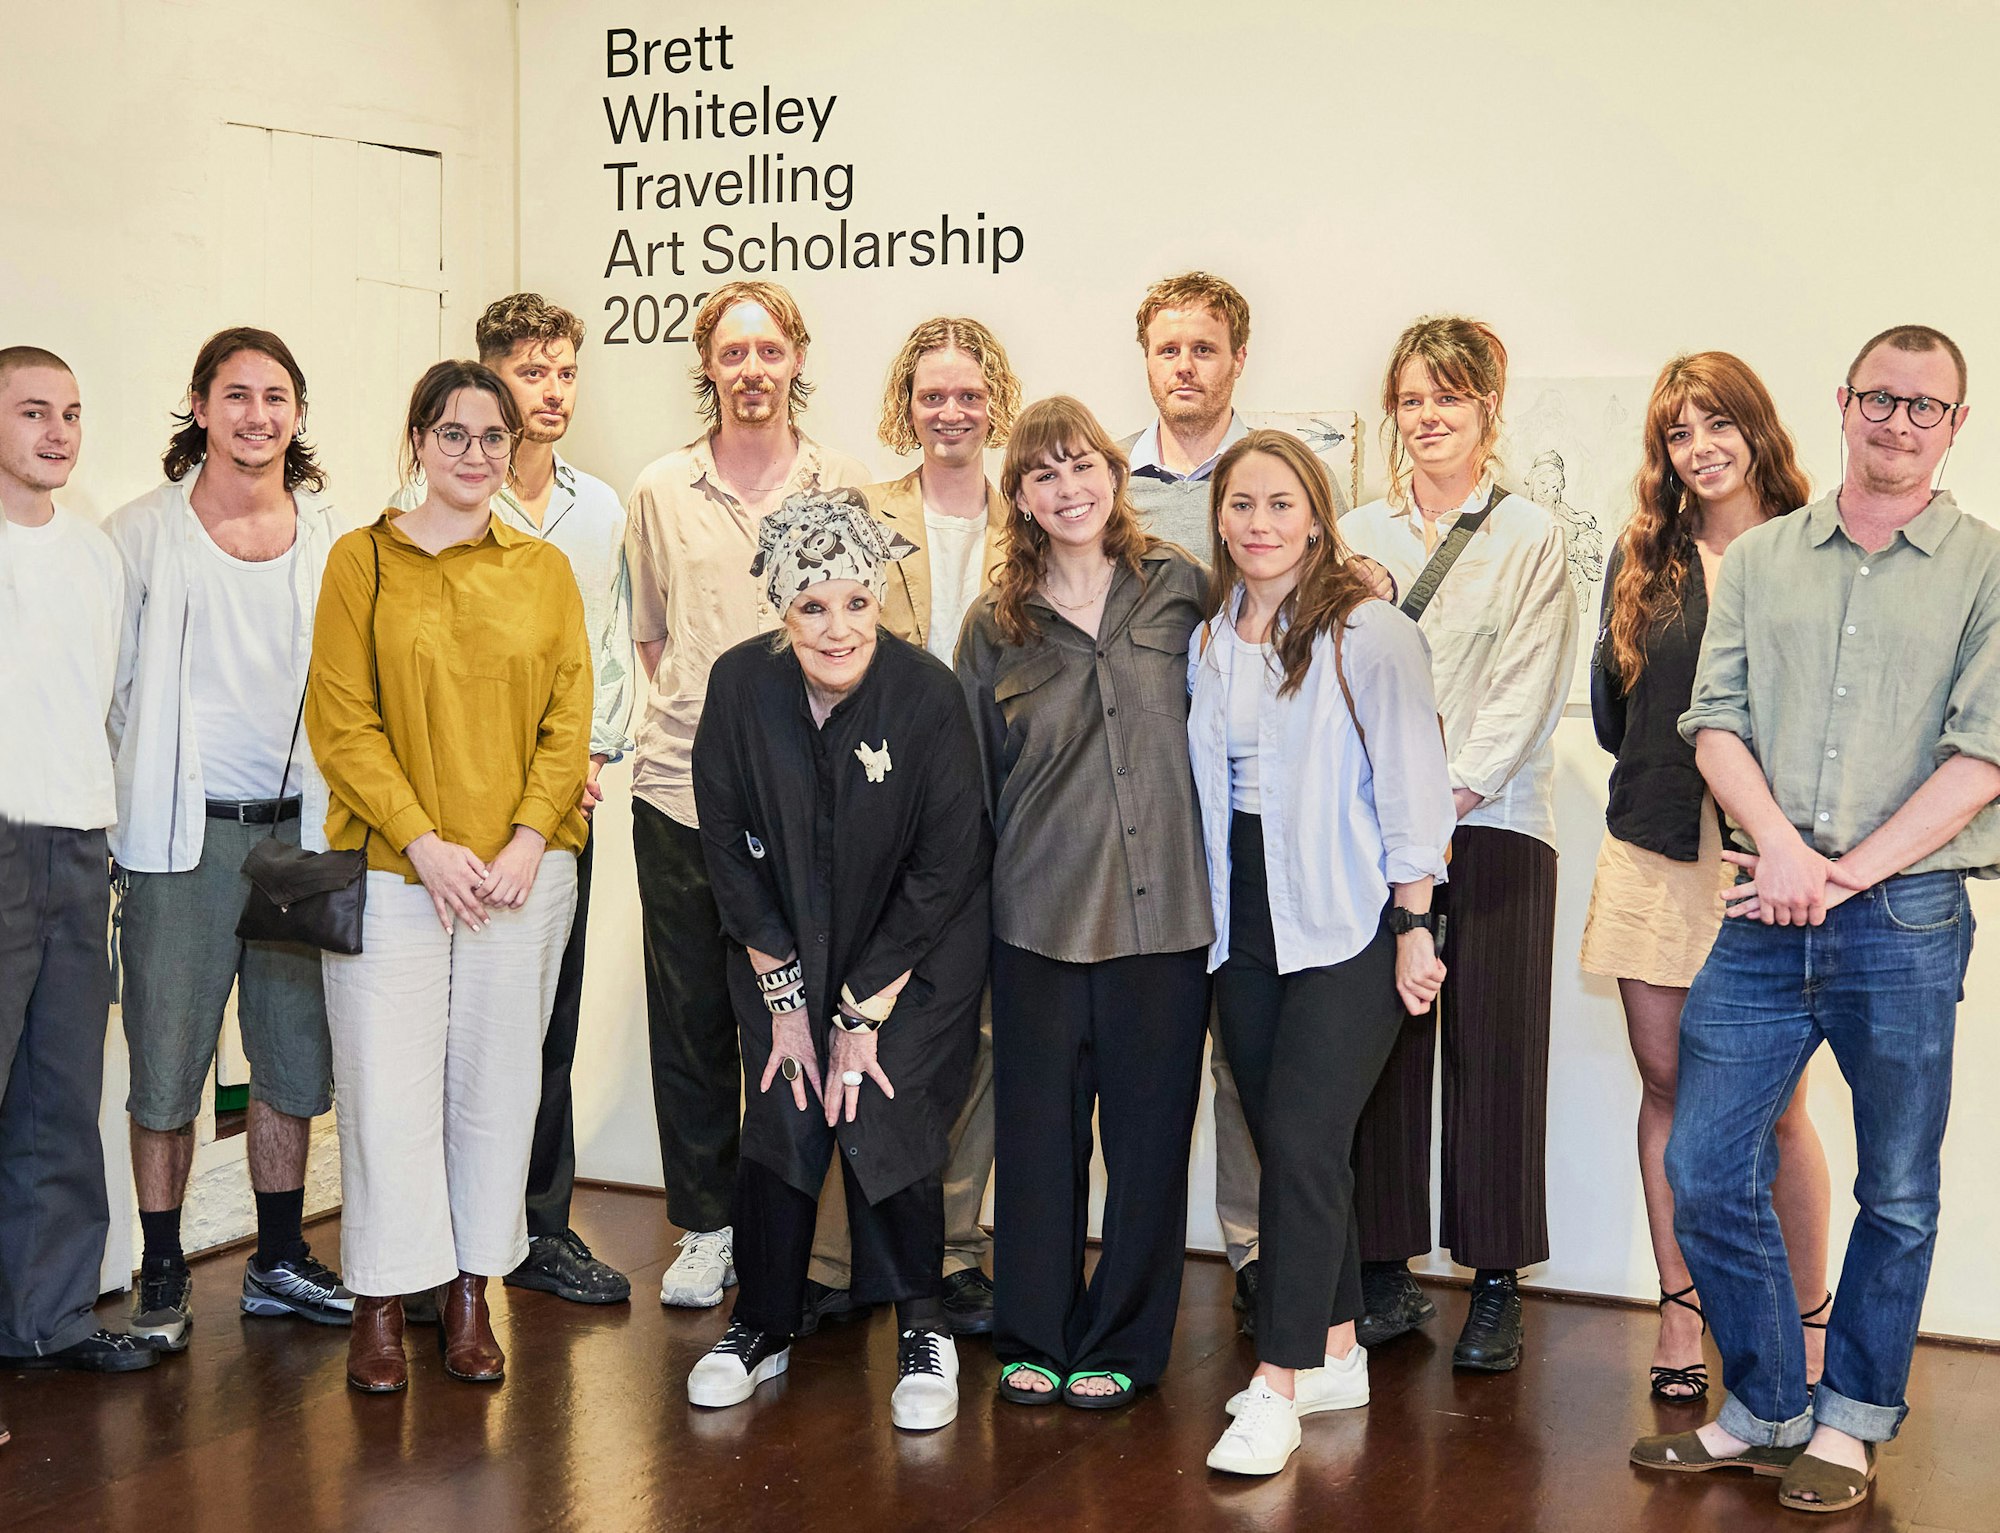 A group of 13 people standing in front of a sign saying 'Brett Whiteley Travelling Art Scholarship 2022'